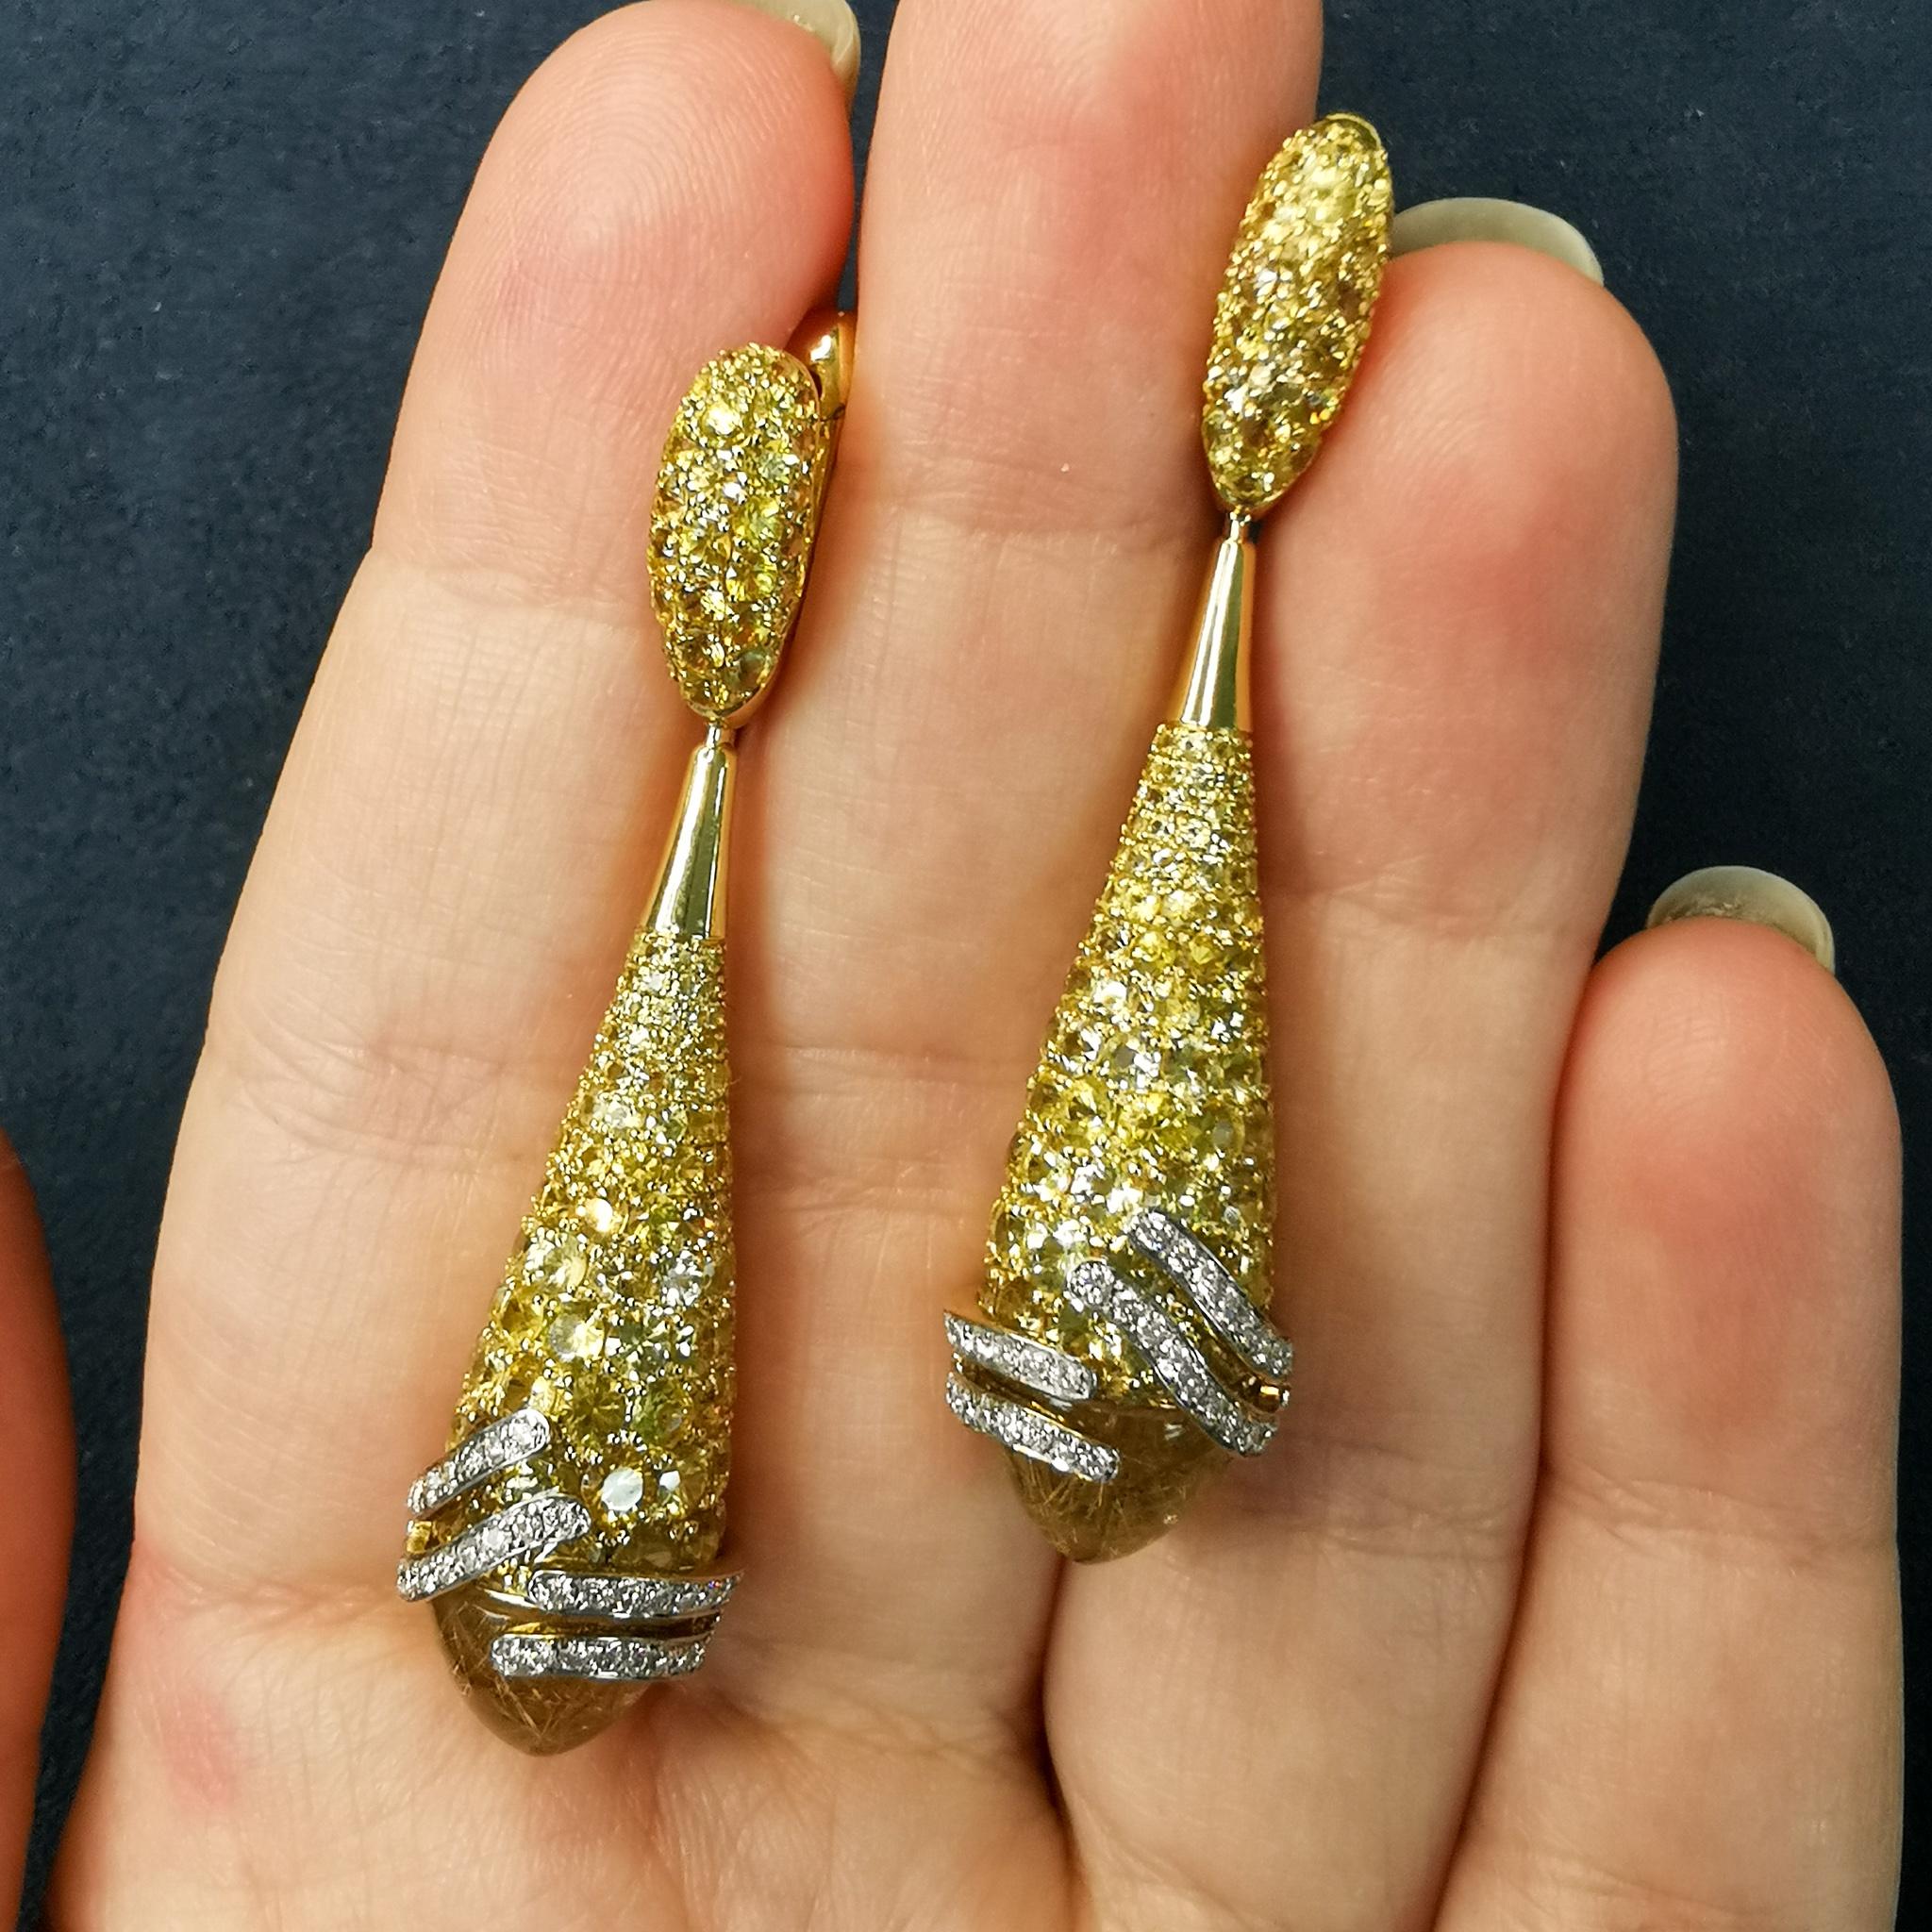 Rutilated Quartz 7.54 Carat Sapphire Diamonds 18 Karat Yellow Gold Fuji Earrings
Series of these Earrings isn't called Fuji for nothing, since the inspiration for the creation of these products came to us exactly from the contemplation of this